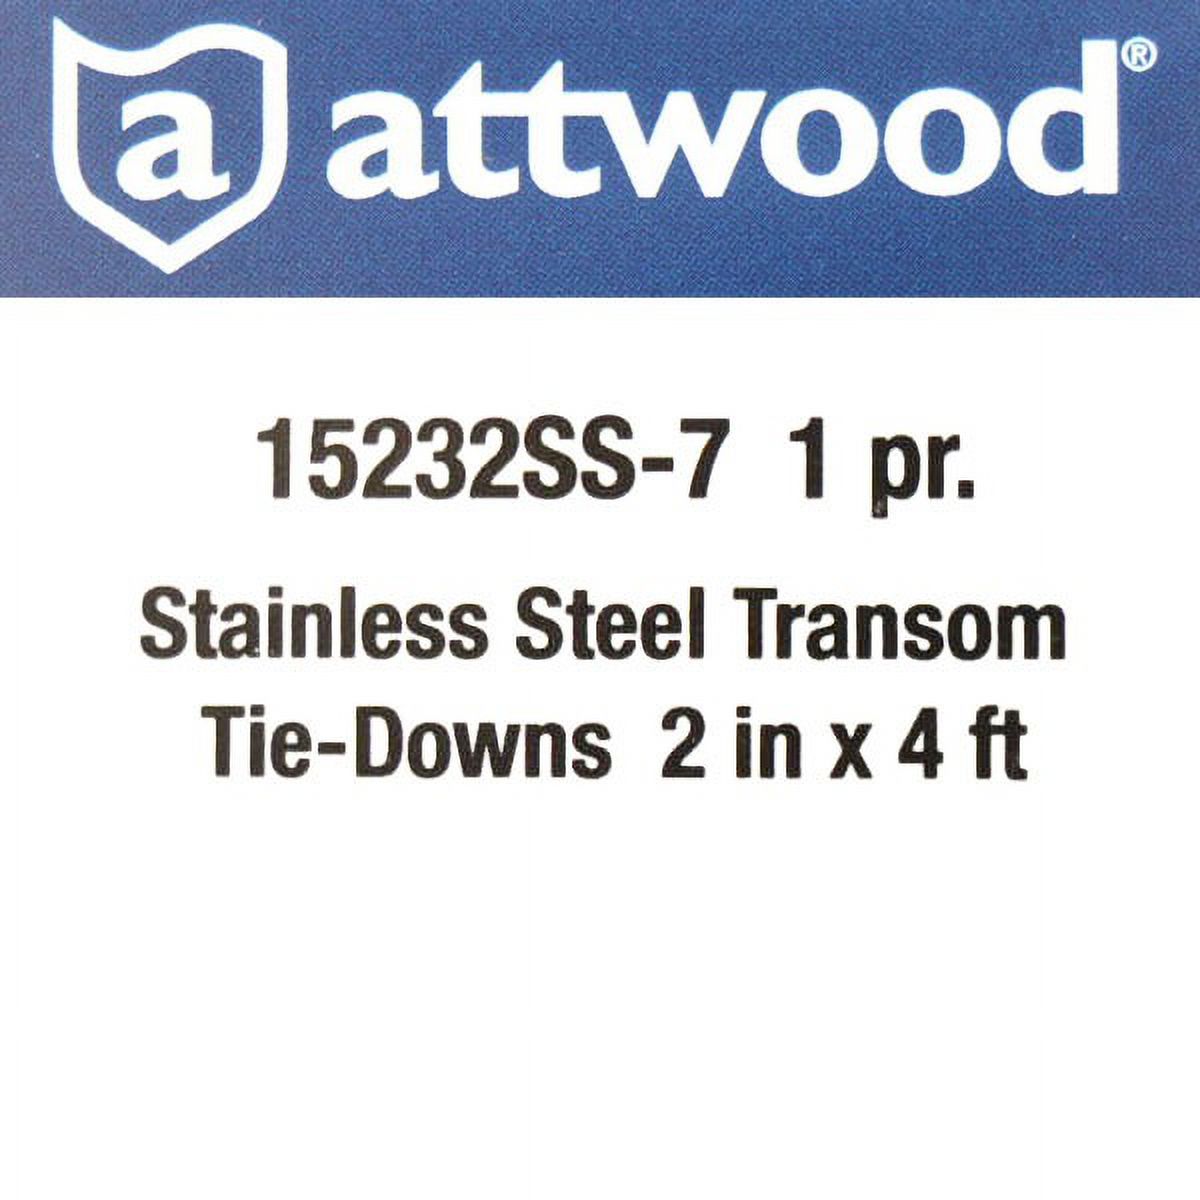 Attwood Boat Transom Tie-Down Straps 15232SS-7 | Black 4 Foot (Pack) - image 4 of 4